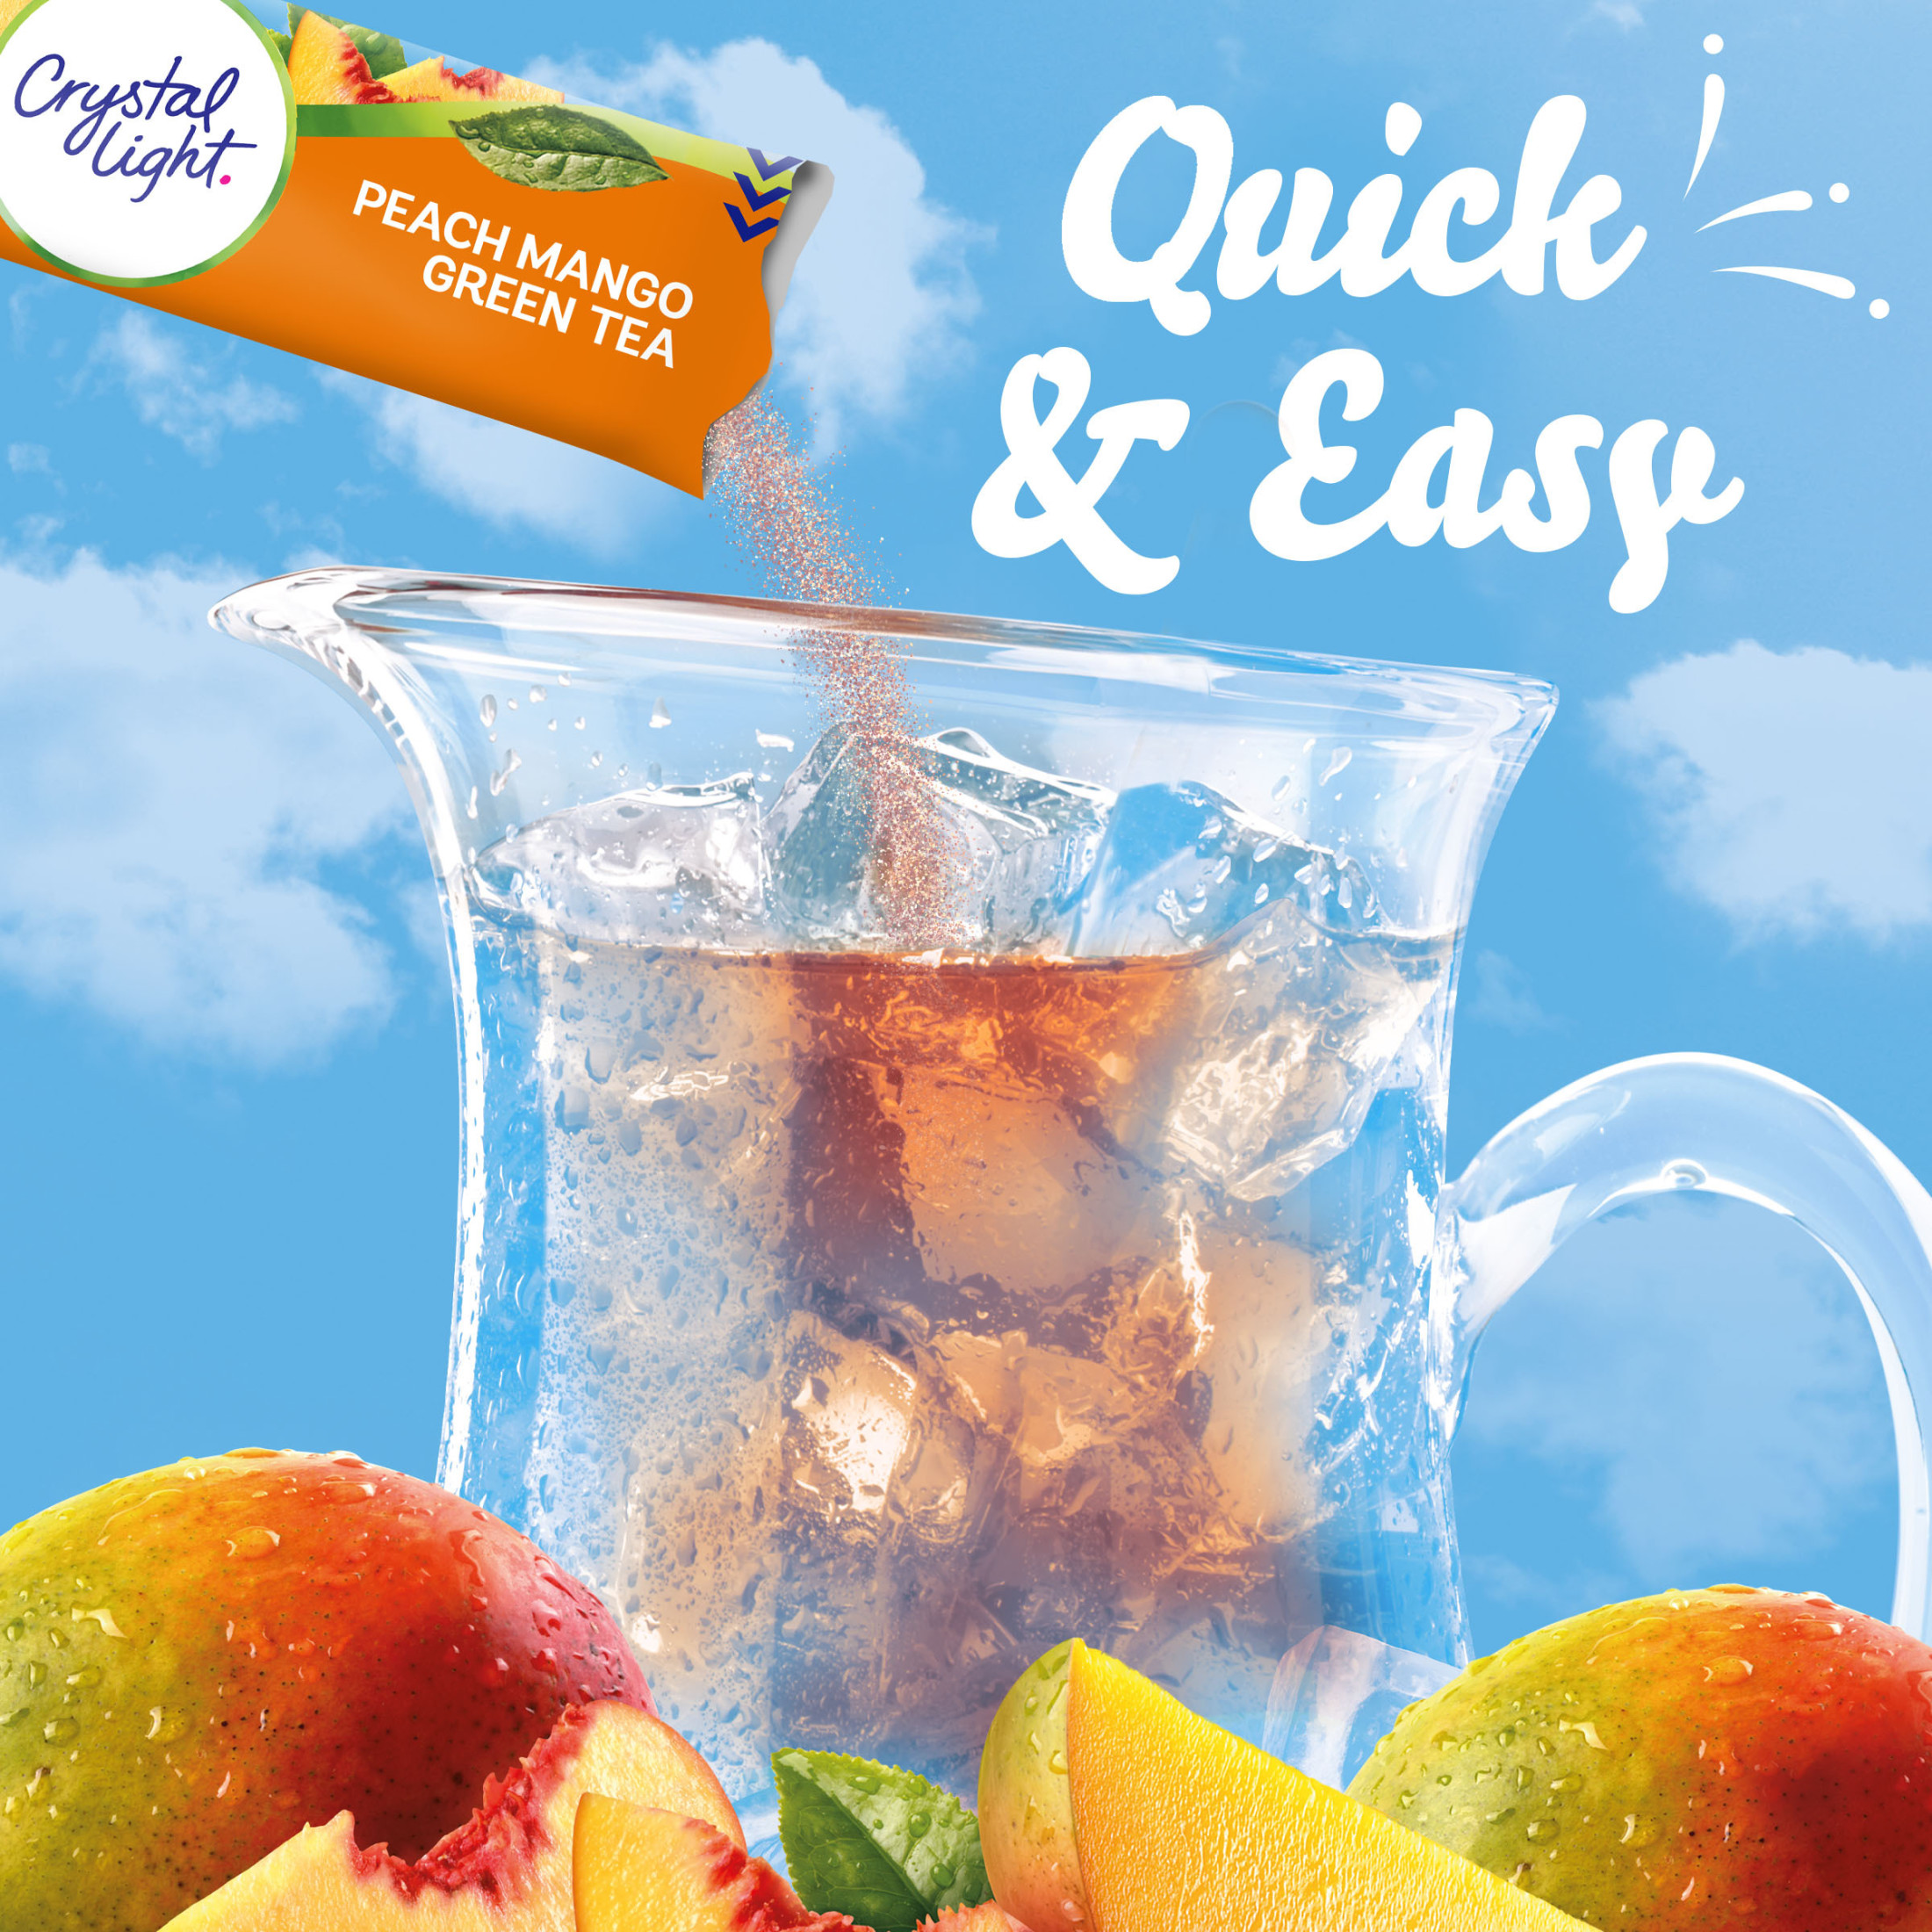 Crystal Light Peach Mango Green Tea Sugar Free Drink Mix, 5 ct Pitcher Packets - image 5 of 15